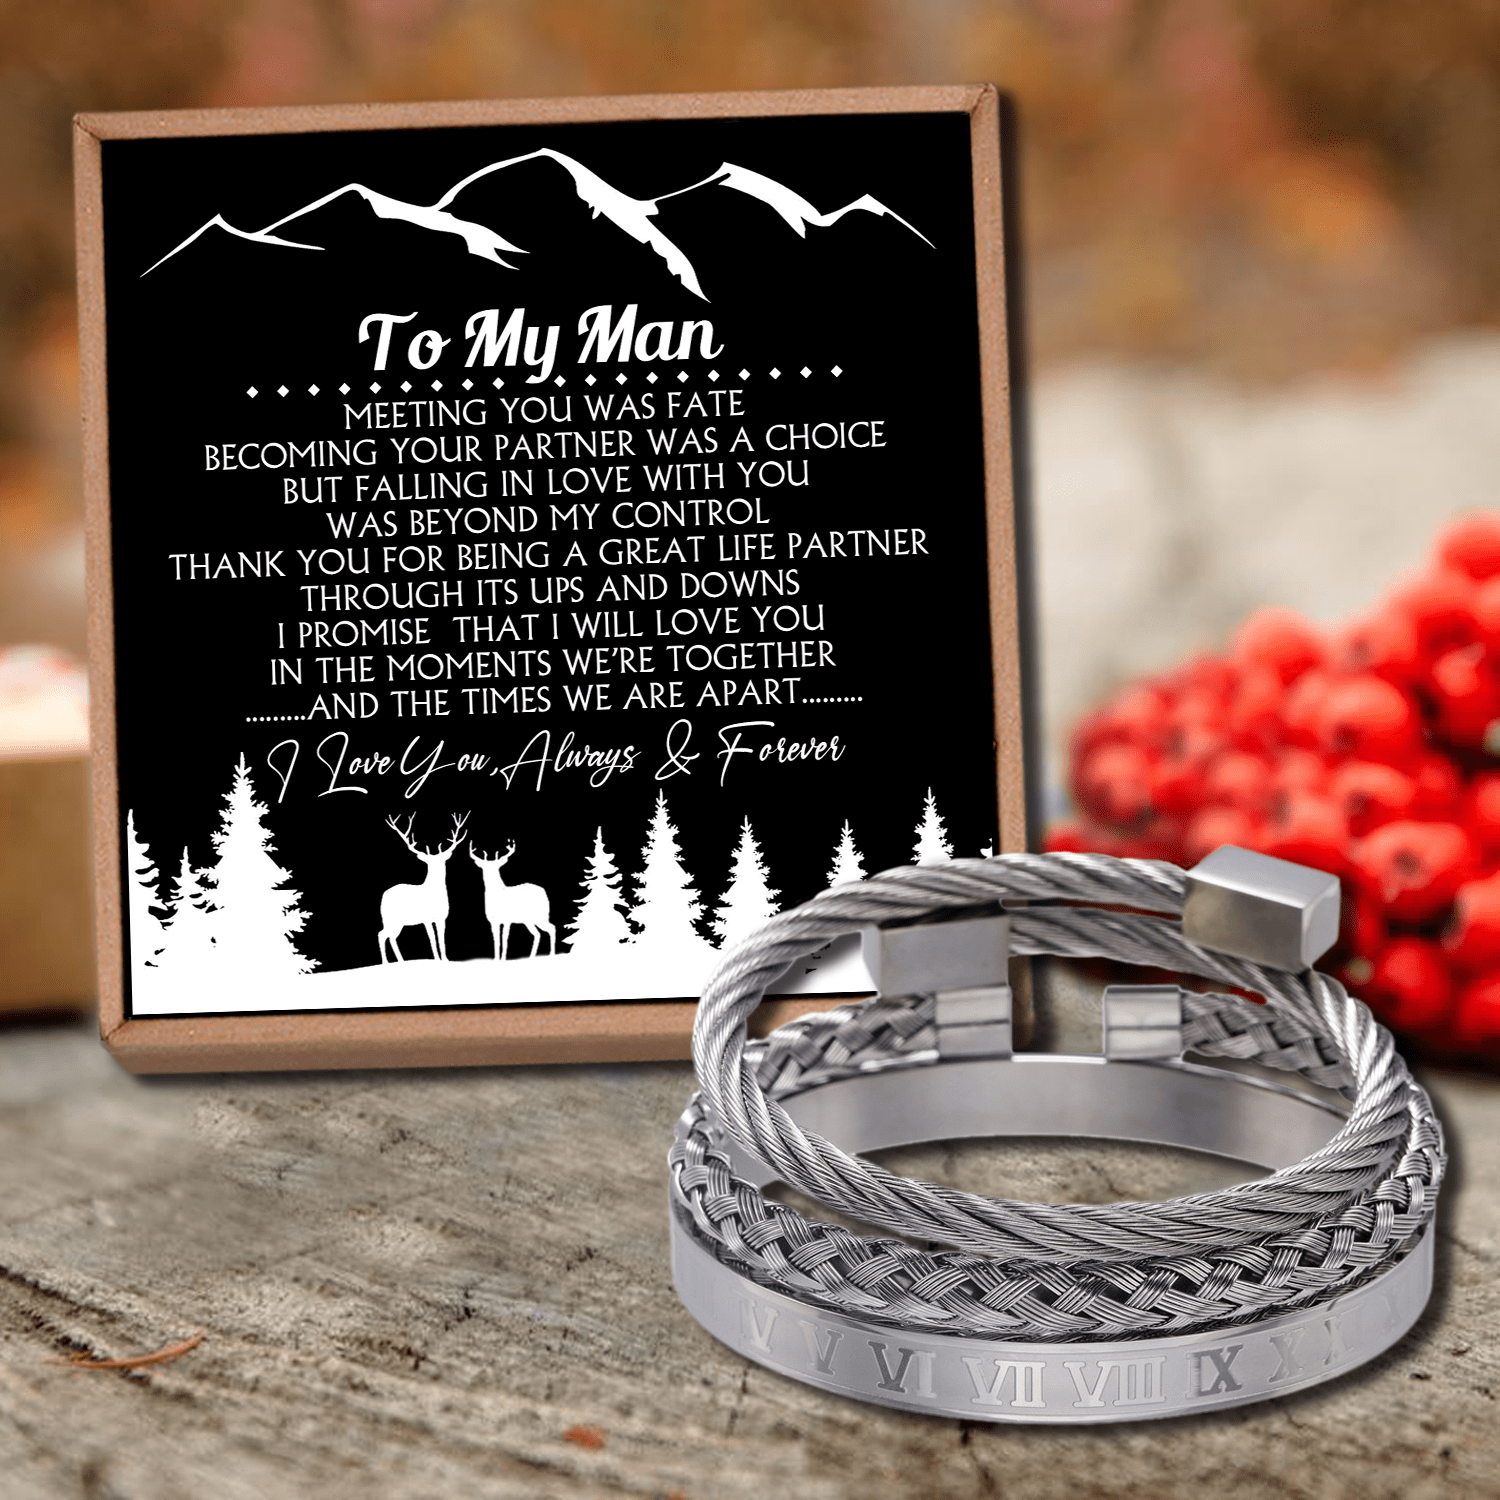 Bracelets To My Man - Meeting You Was Fate Roman Numeral Bracelet Set Silver GiveMe-Gifts